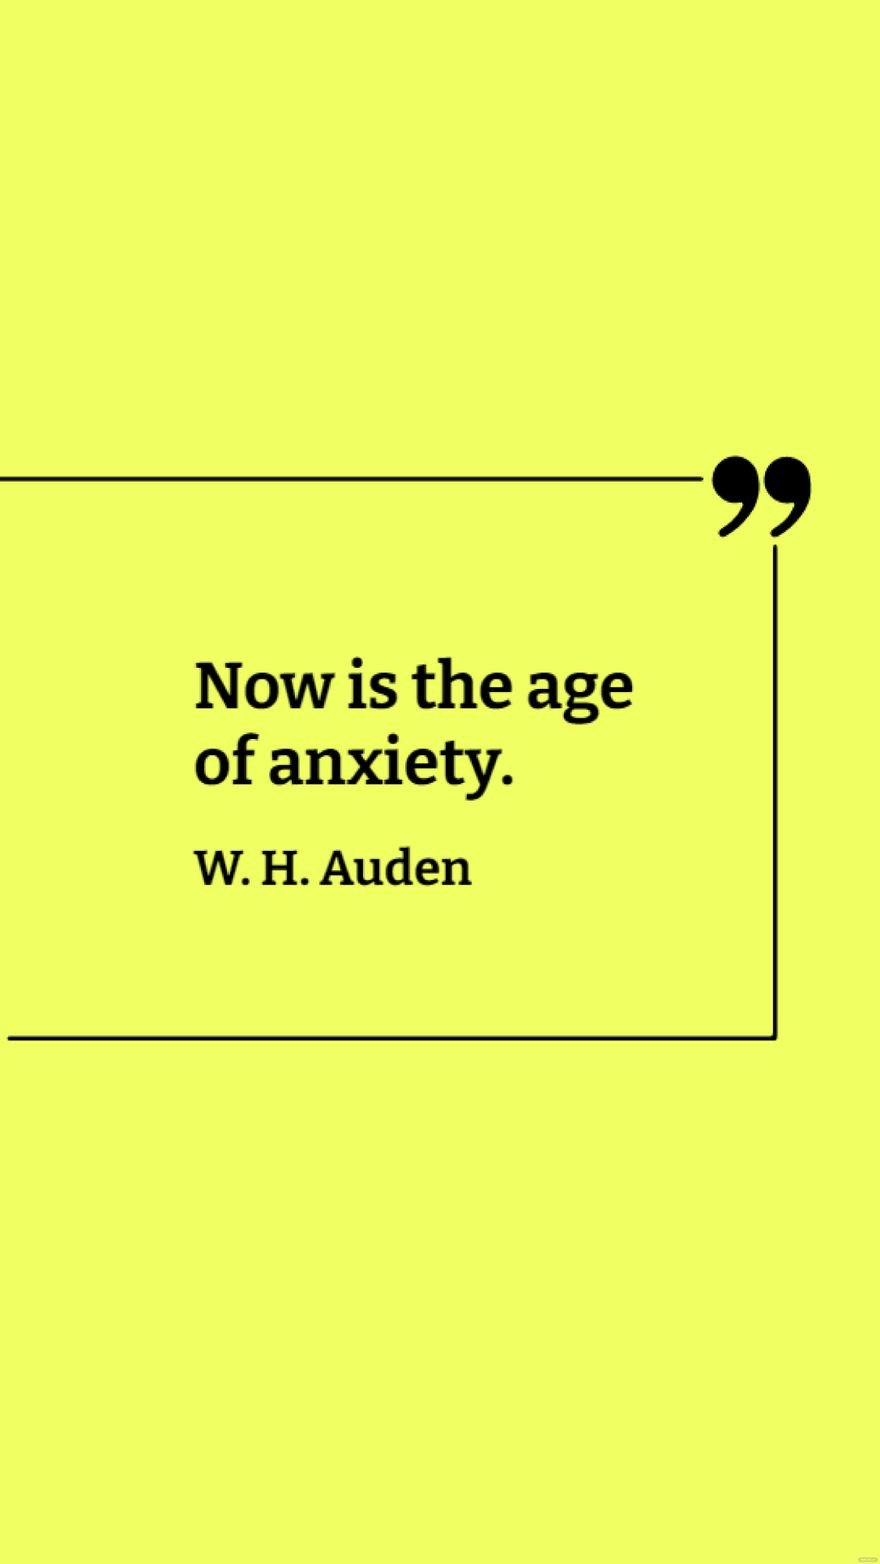 Free W. H. Auden - Now is the age of anxiety. in JPG